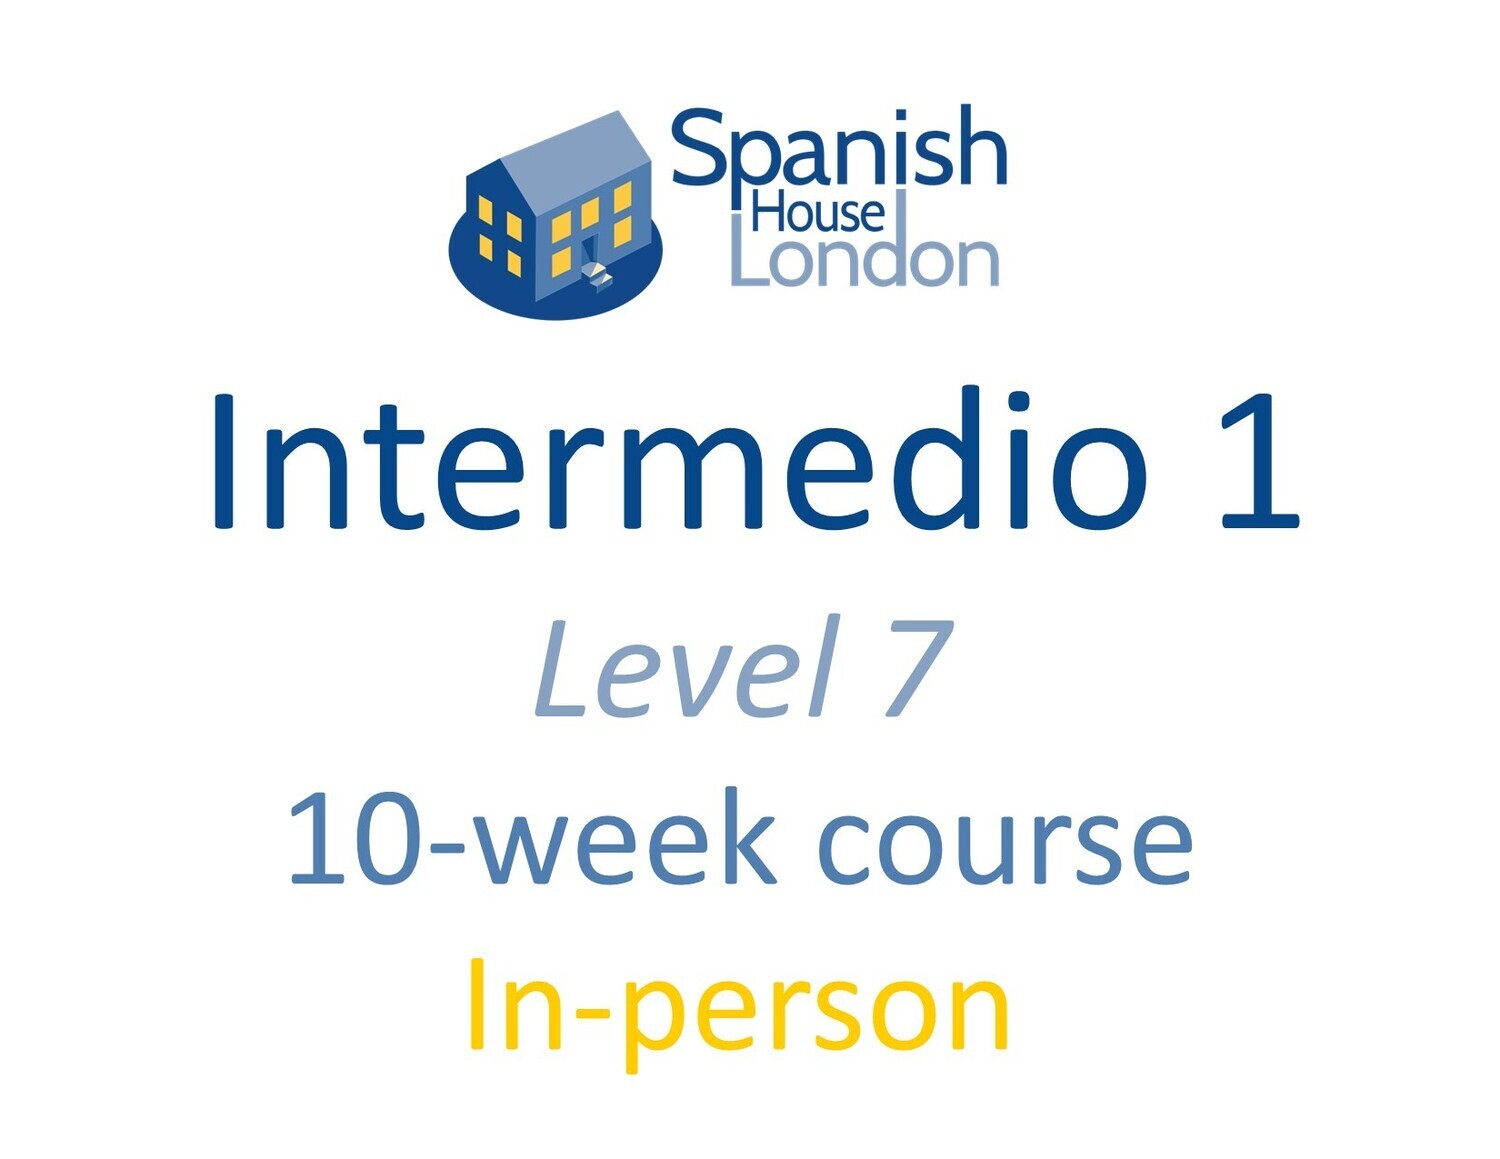 Intermedio 1 Course starting on 8th September at 7.30pm in Euston / King's Cross